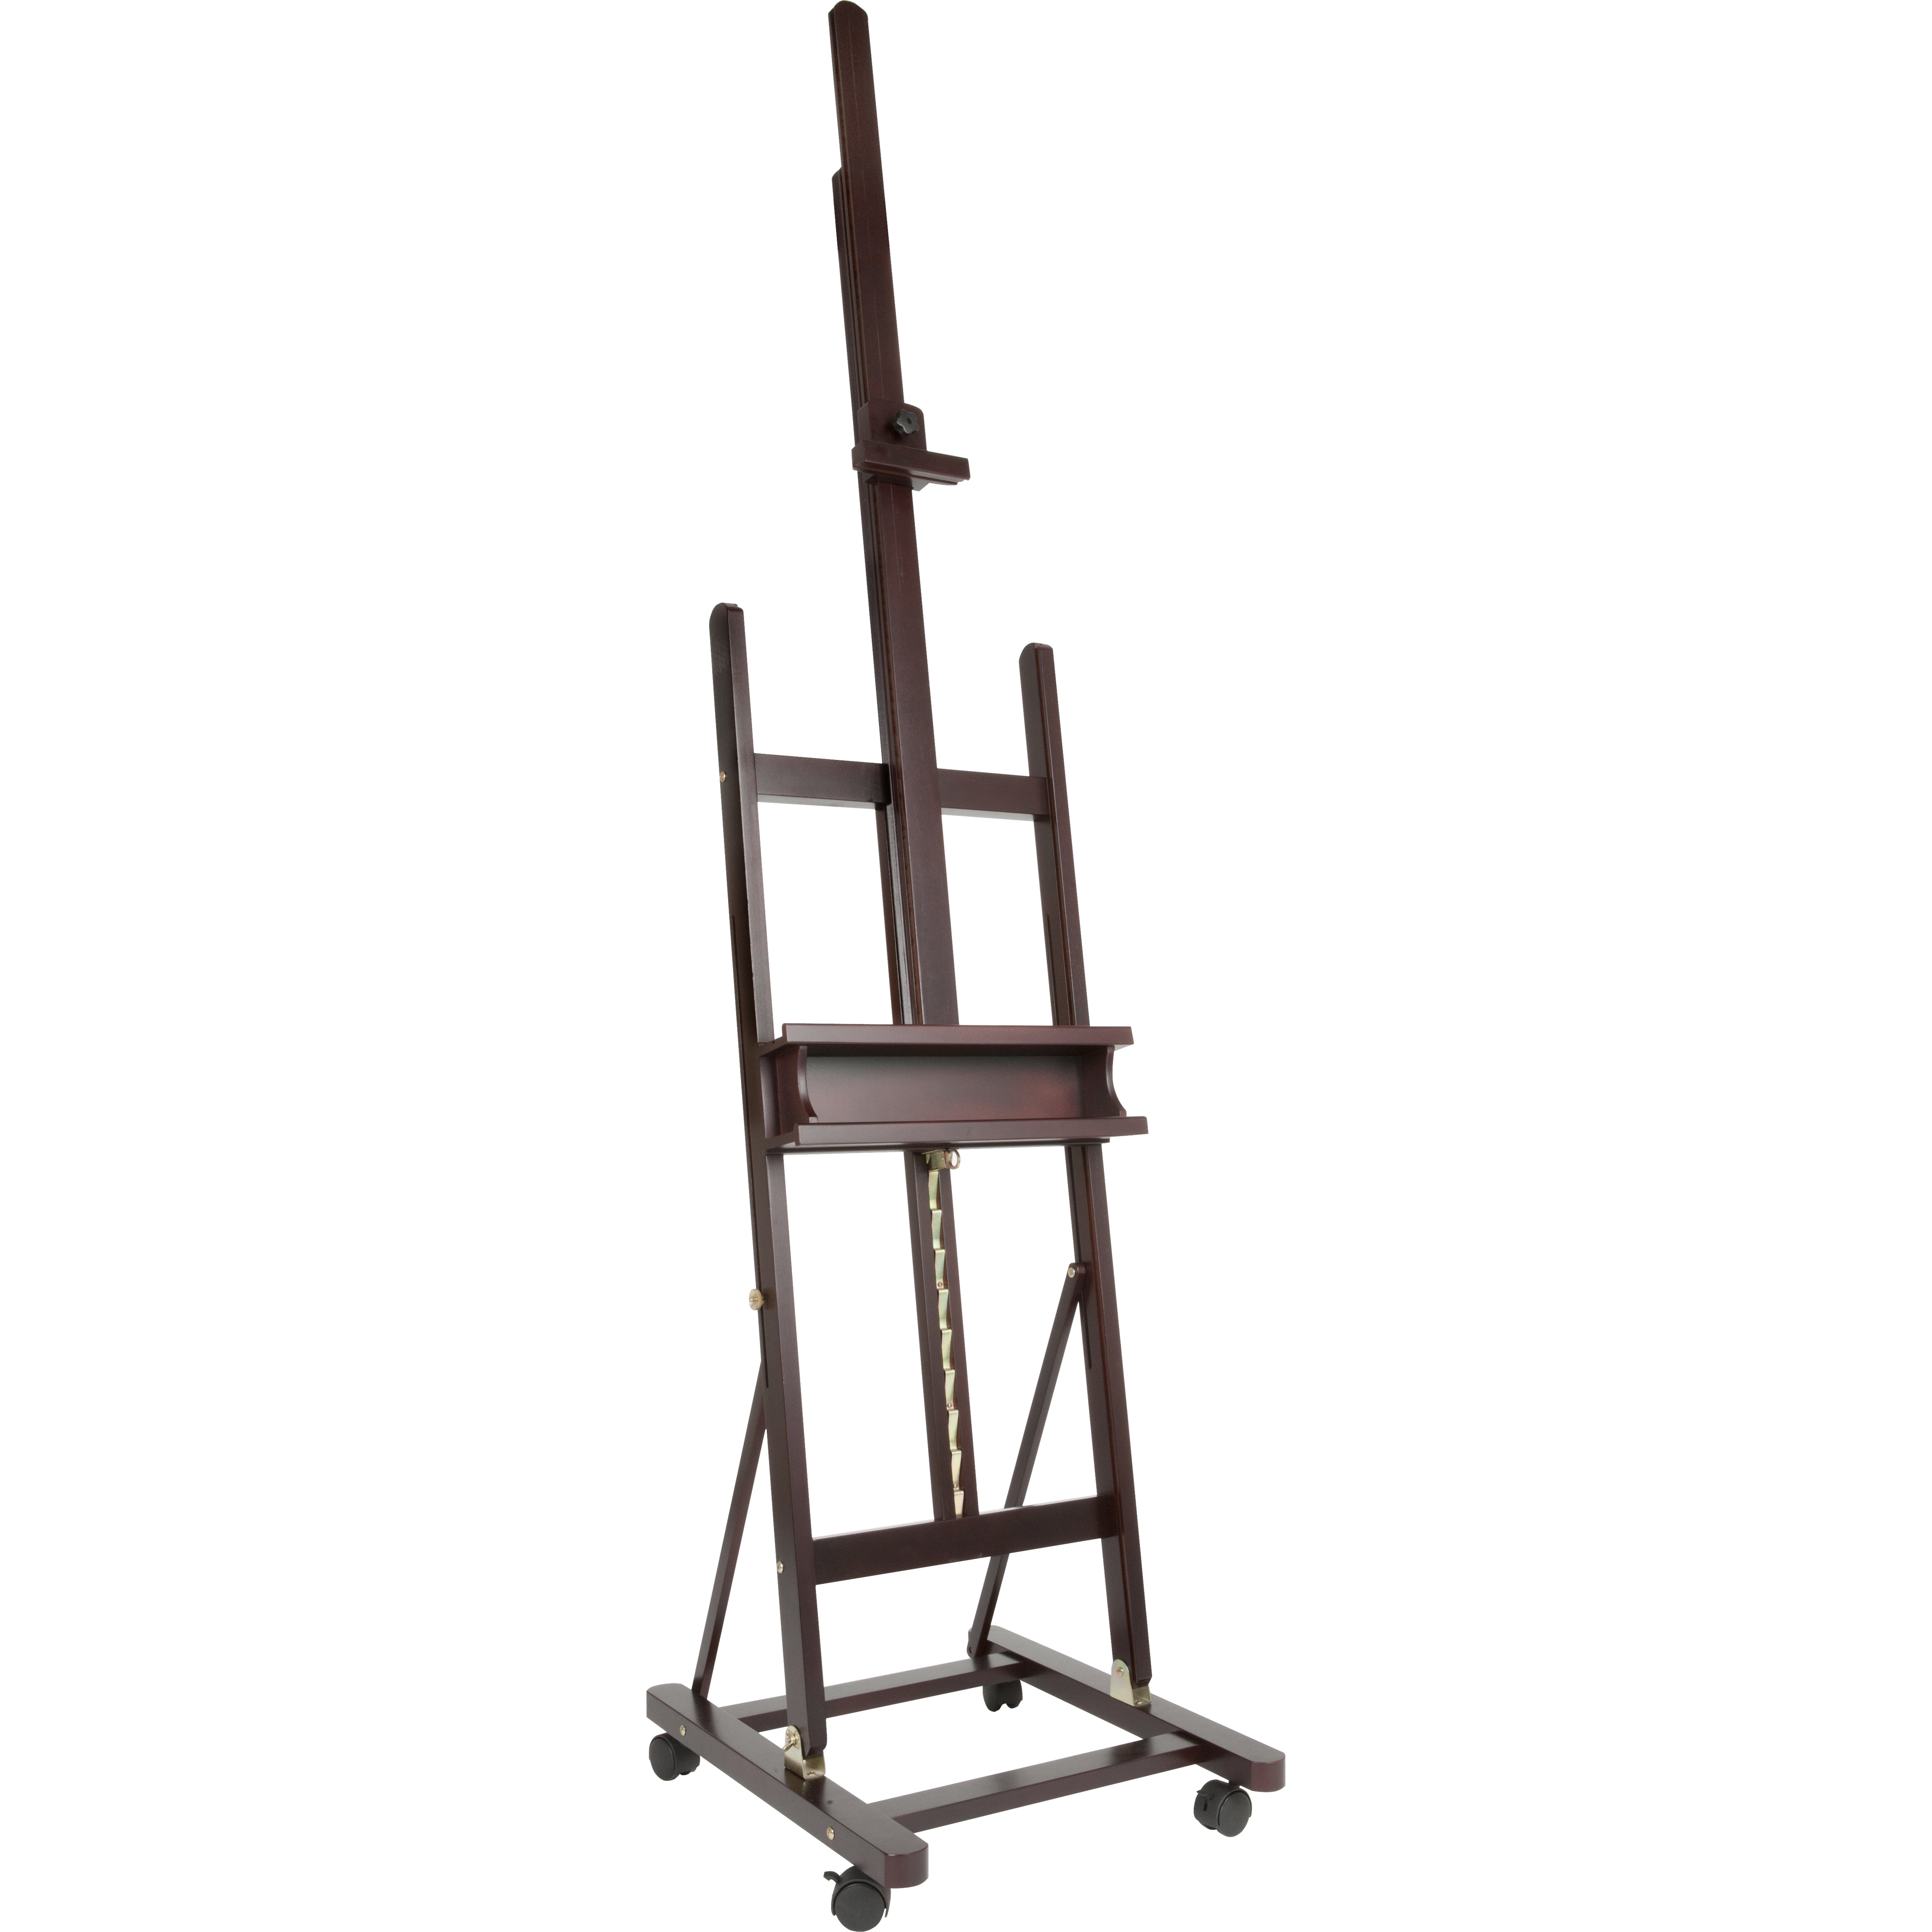 uyoyous Adjustable Height Wood A-frame Art Easel Stand for Painting 